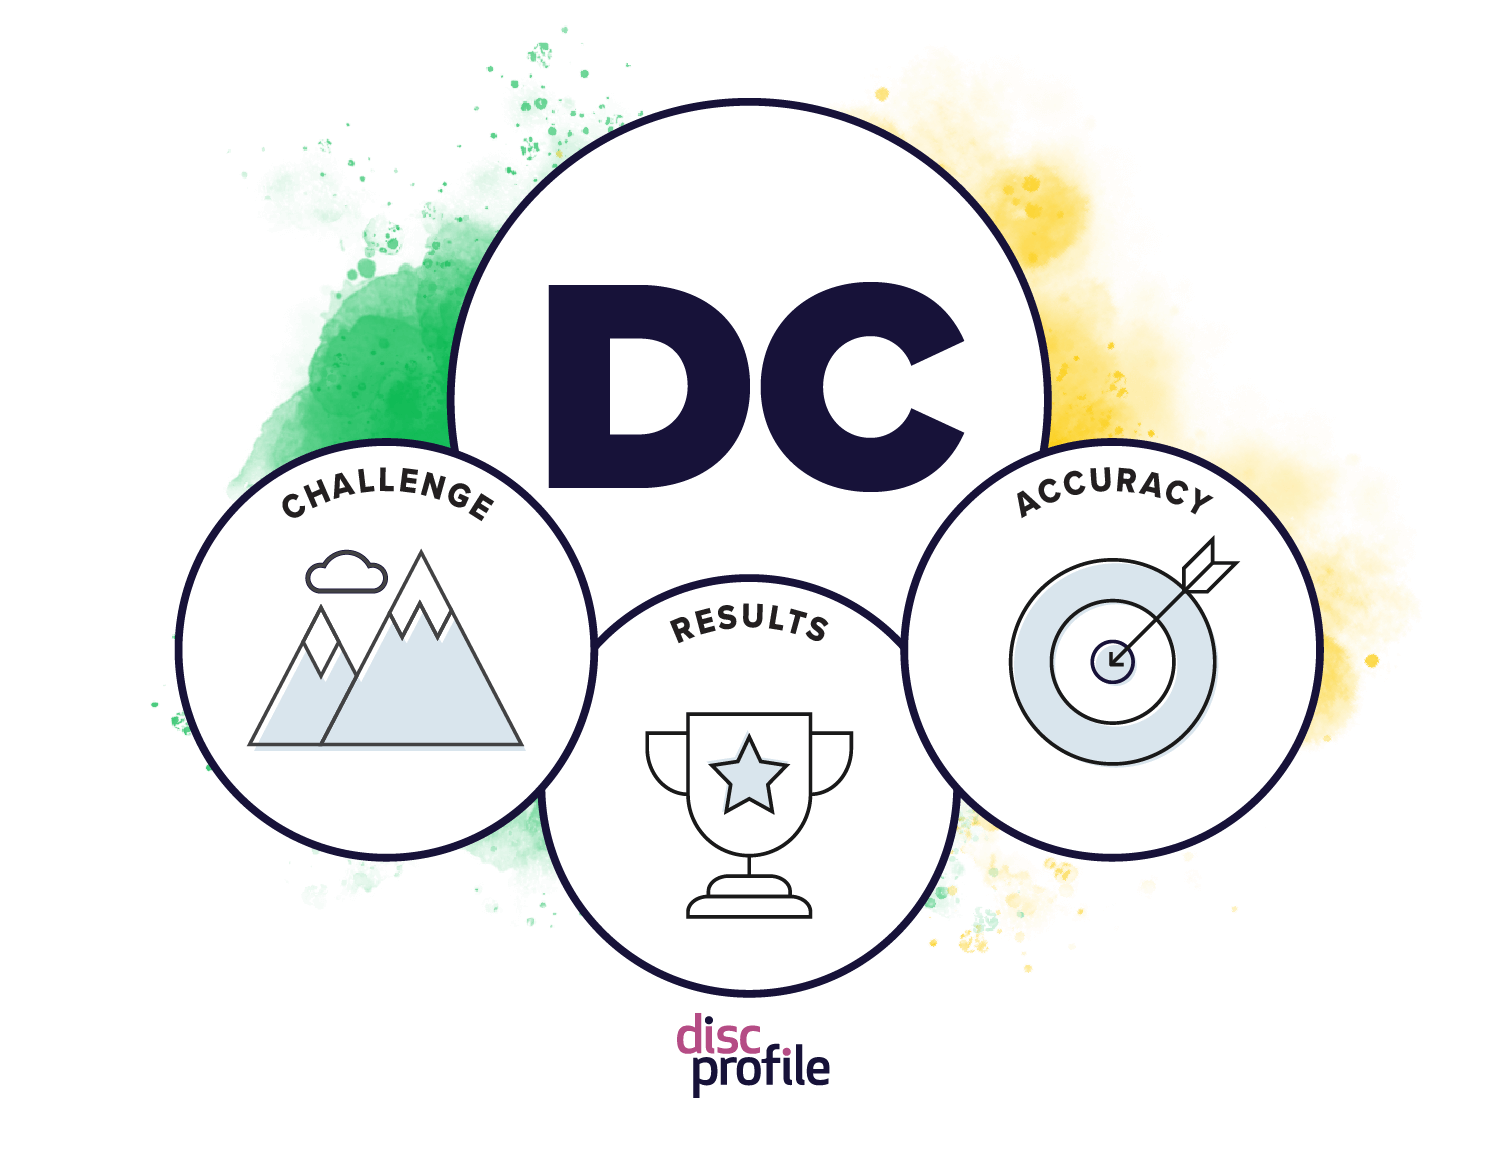 DC style graphic with priorities: challenge, results, accuracy